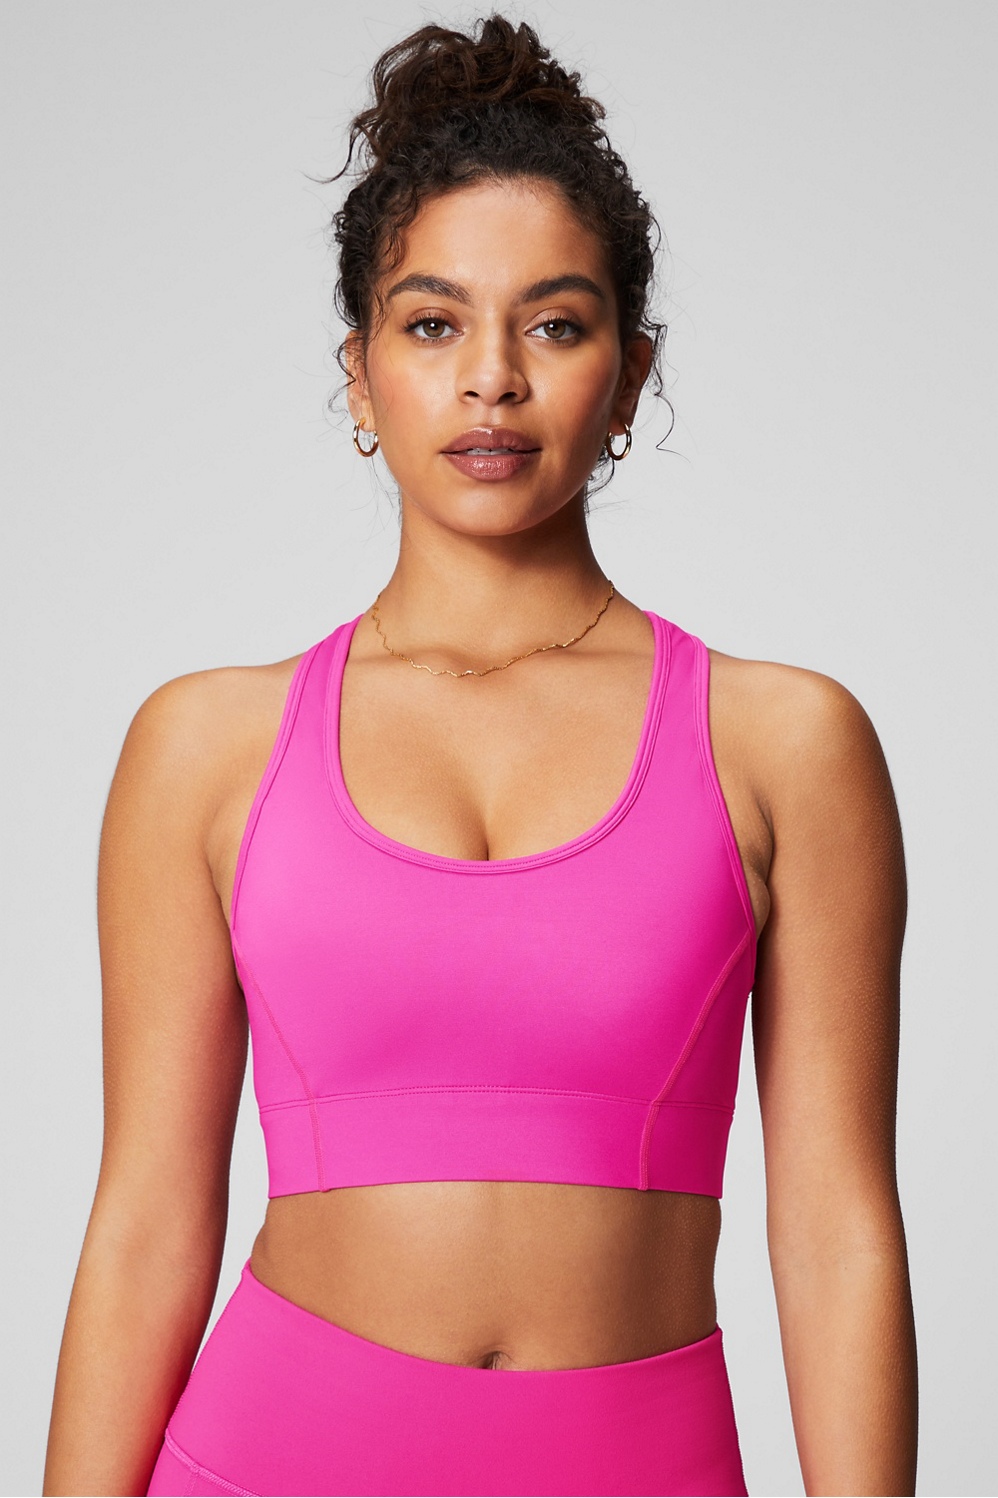 Swipe for fit pics —>] High Support Bras Now Live! Excited to